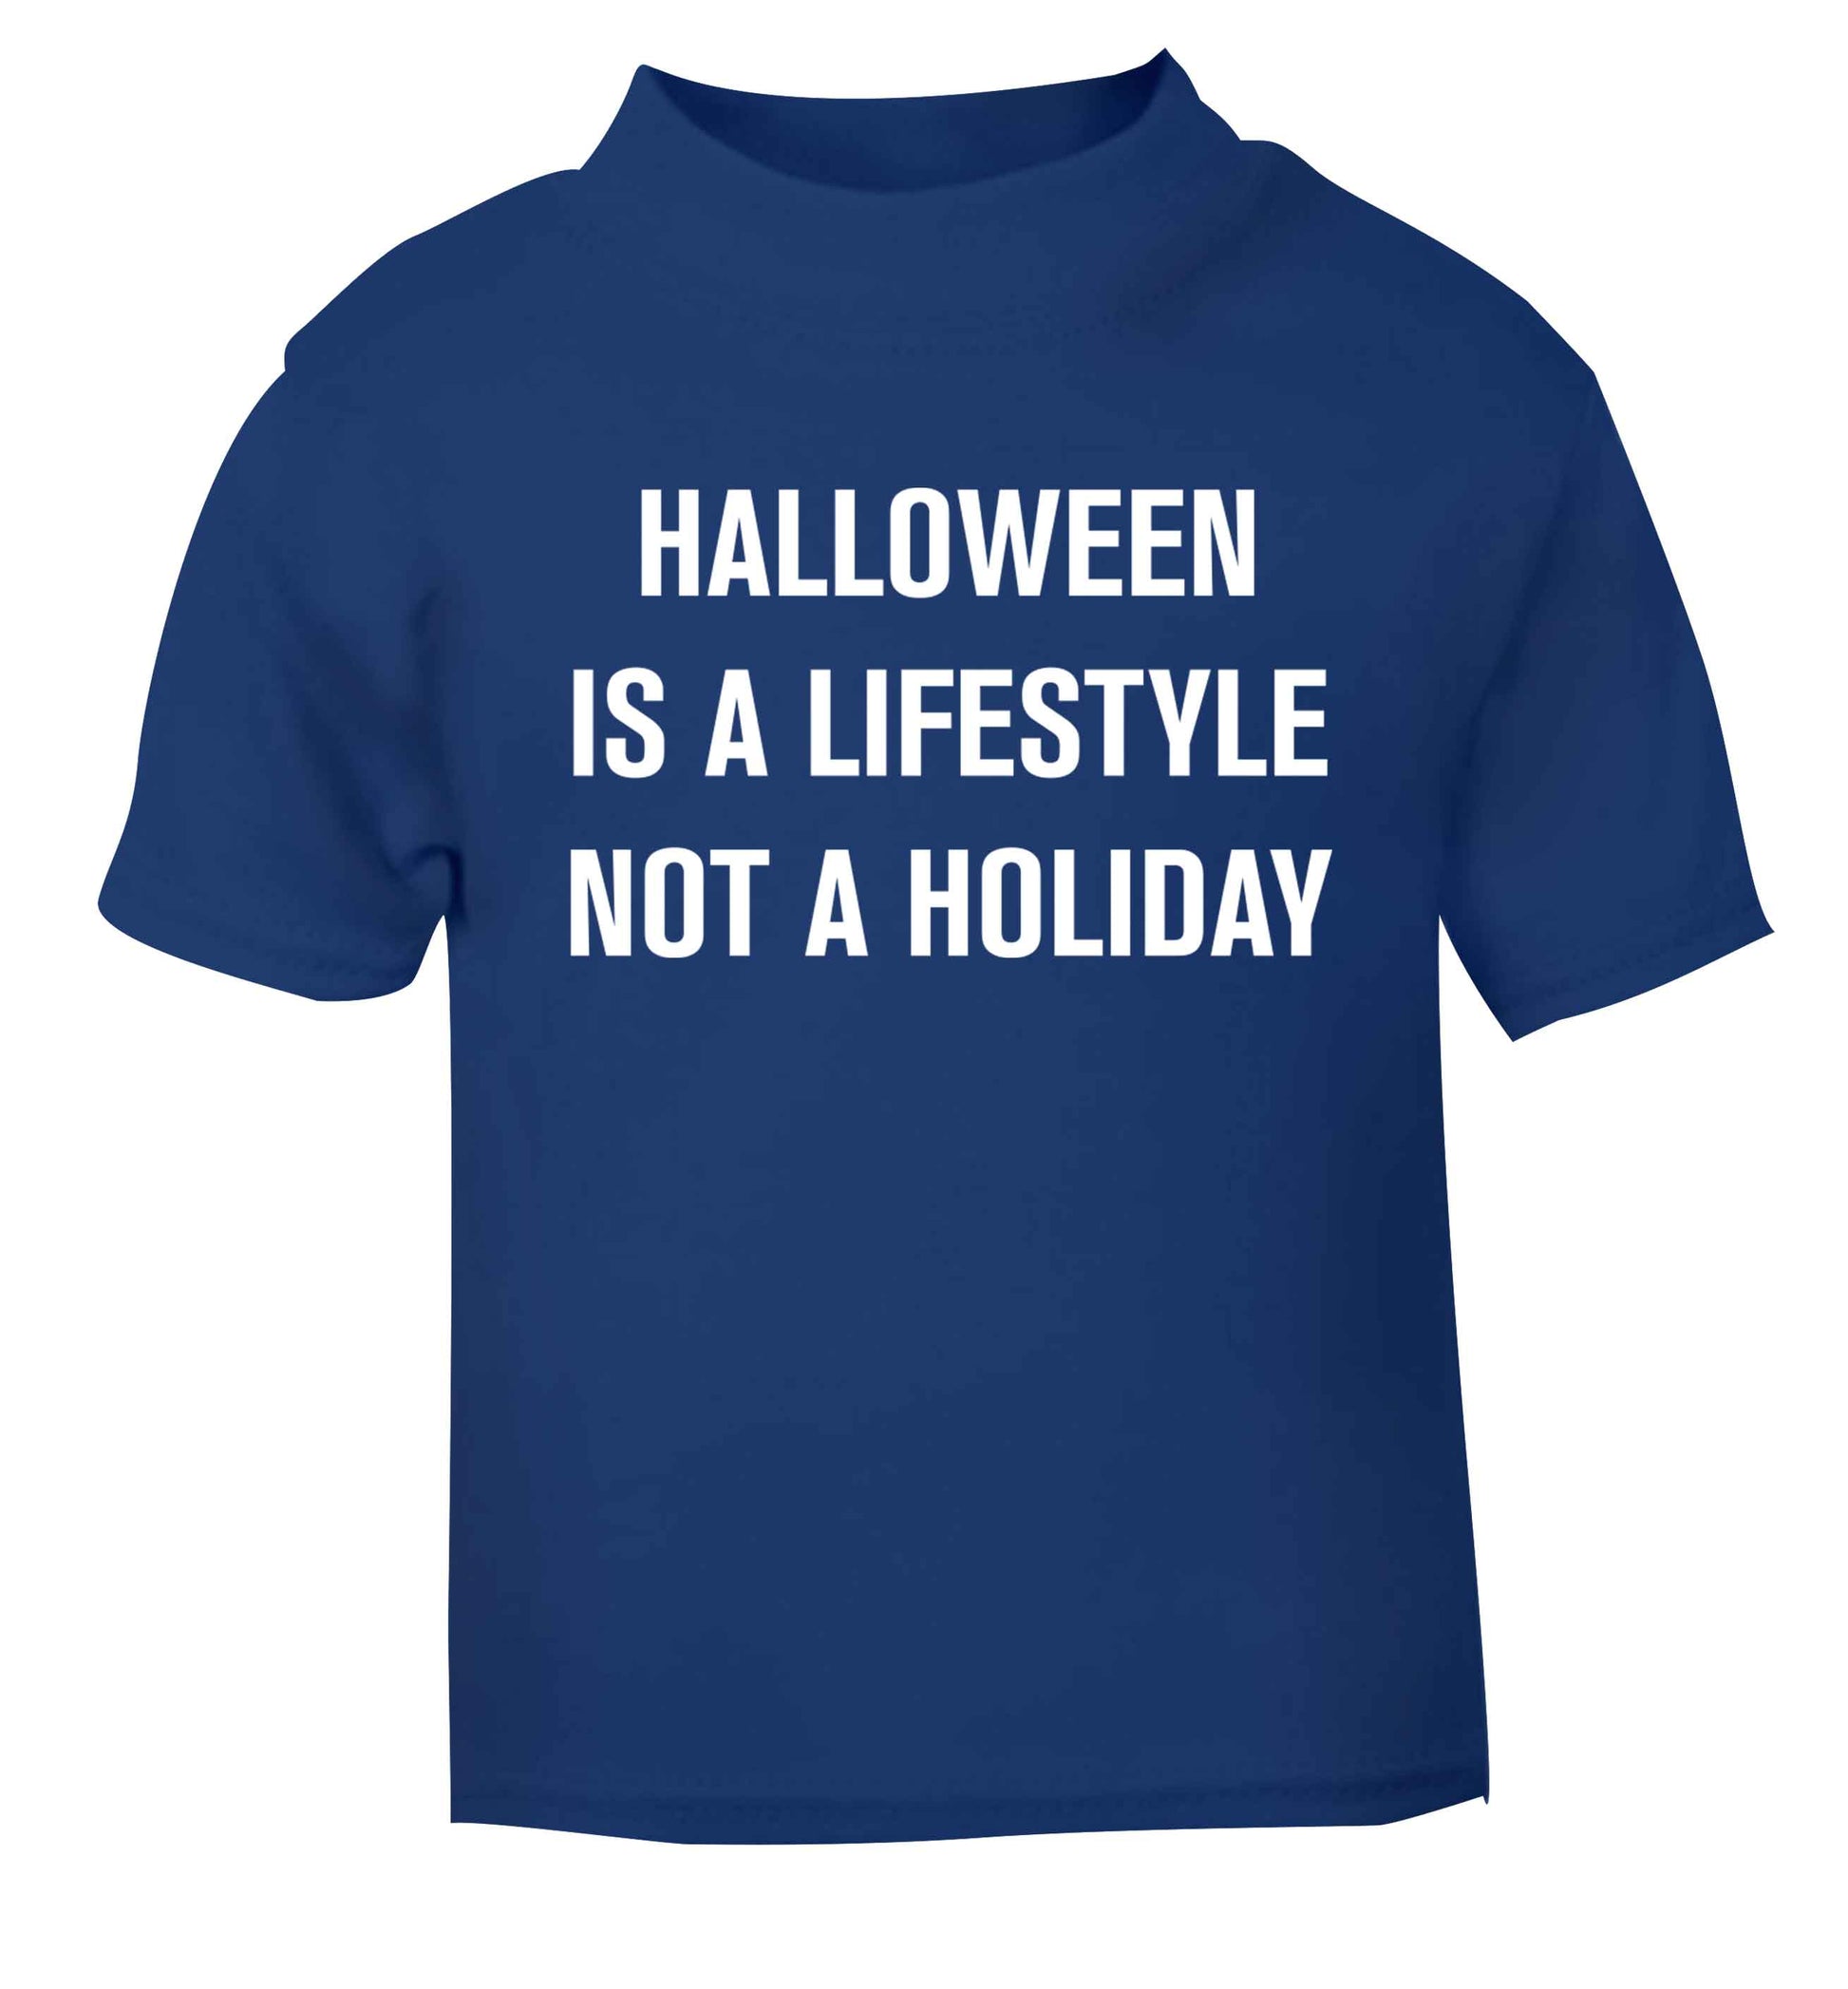 Halloween is a lifestyle not a holiday blue baby toddler Tshirt 2 Years